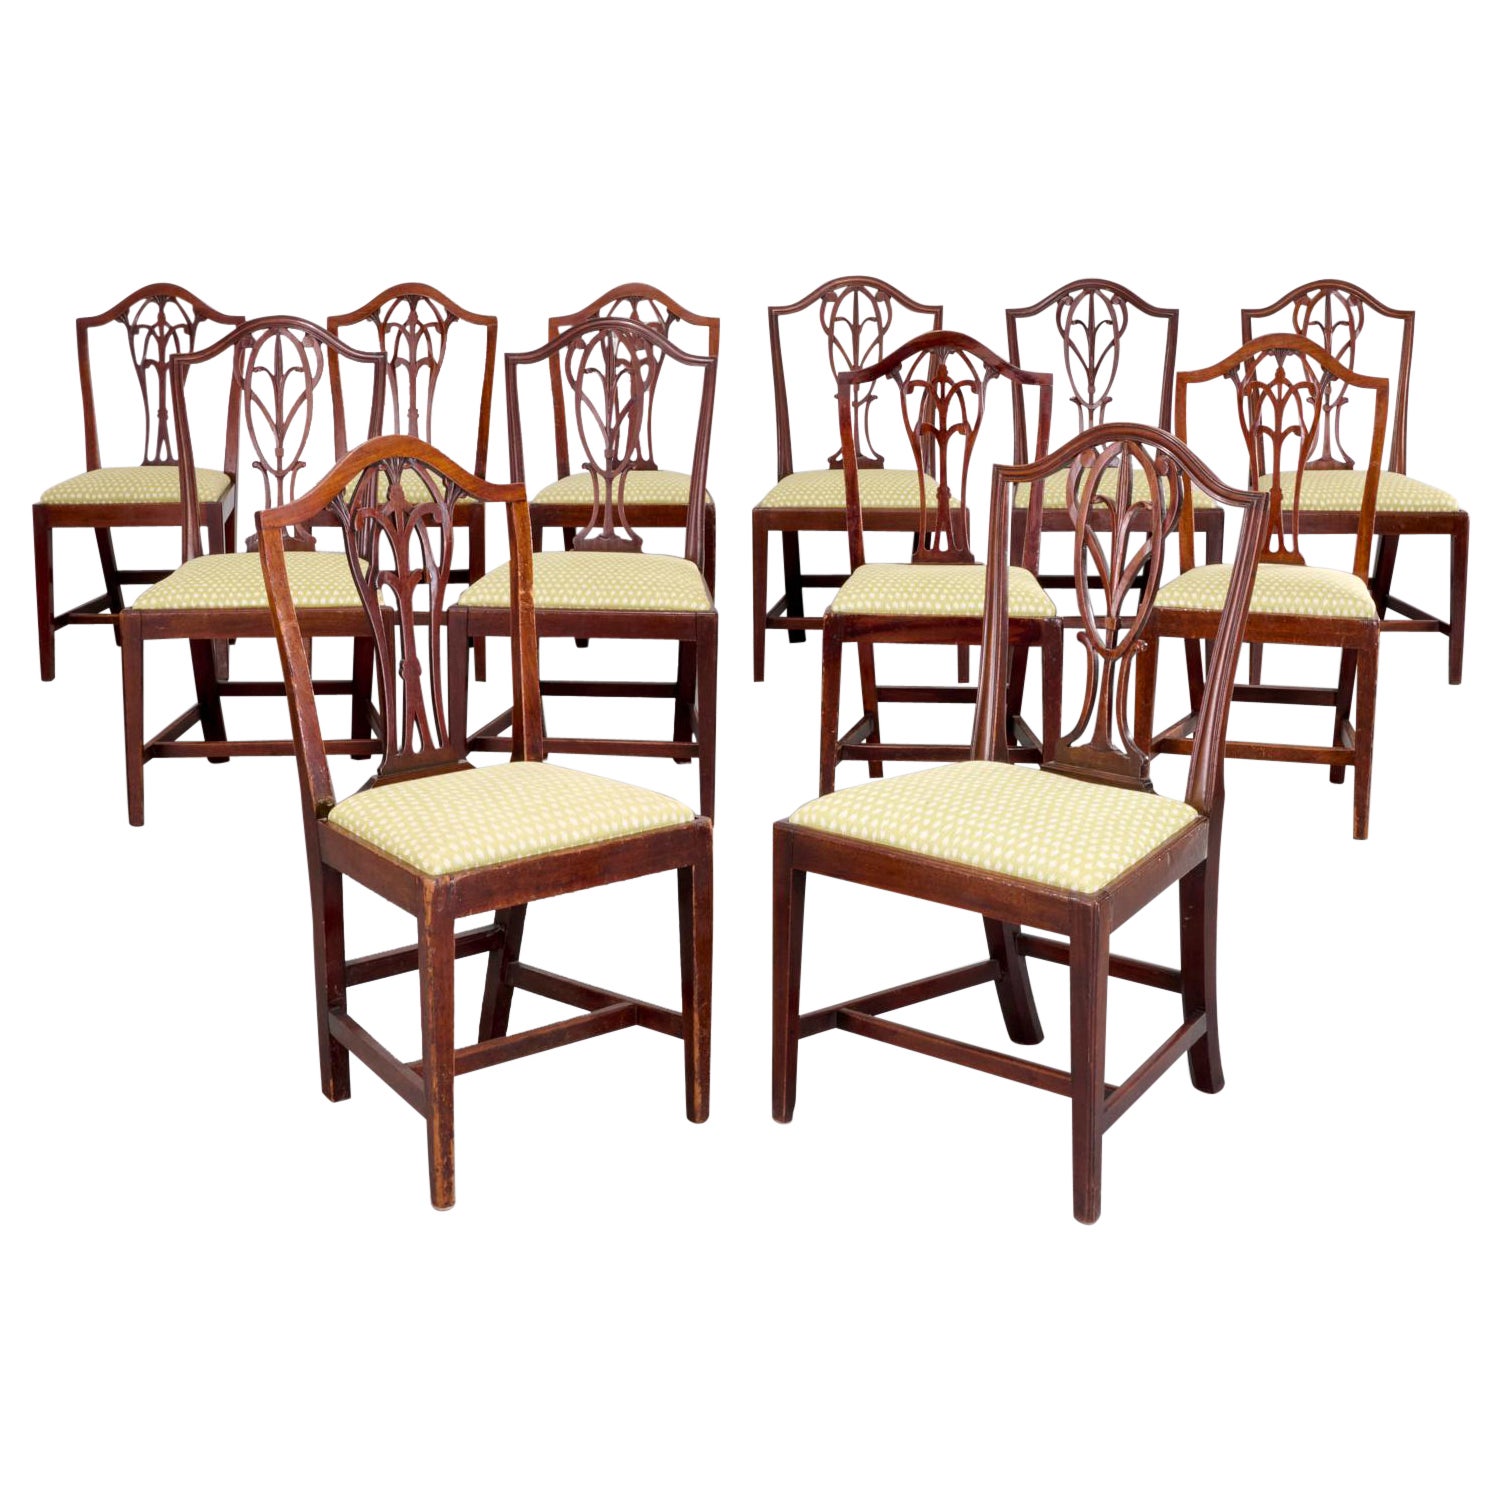 12 Antique English Hepplewhite Style Dining Chairs Supplied by Mario Buatta